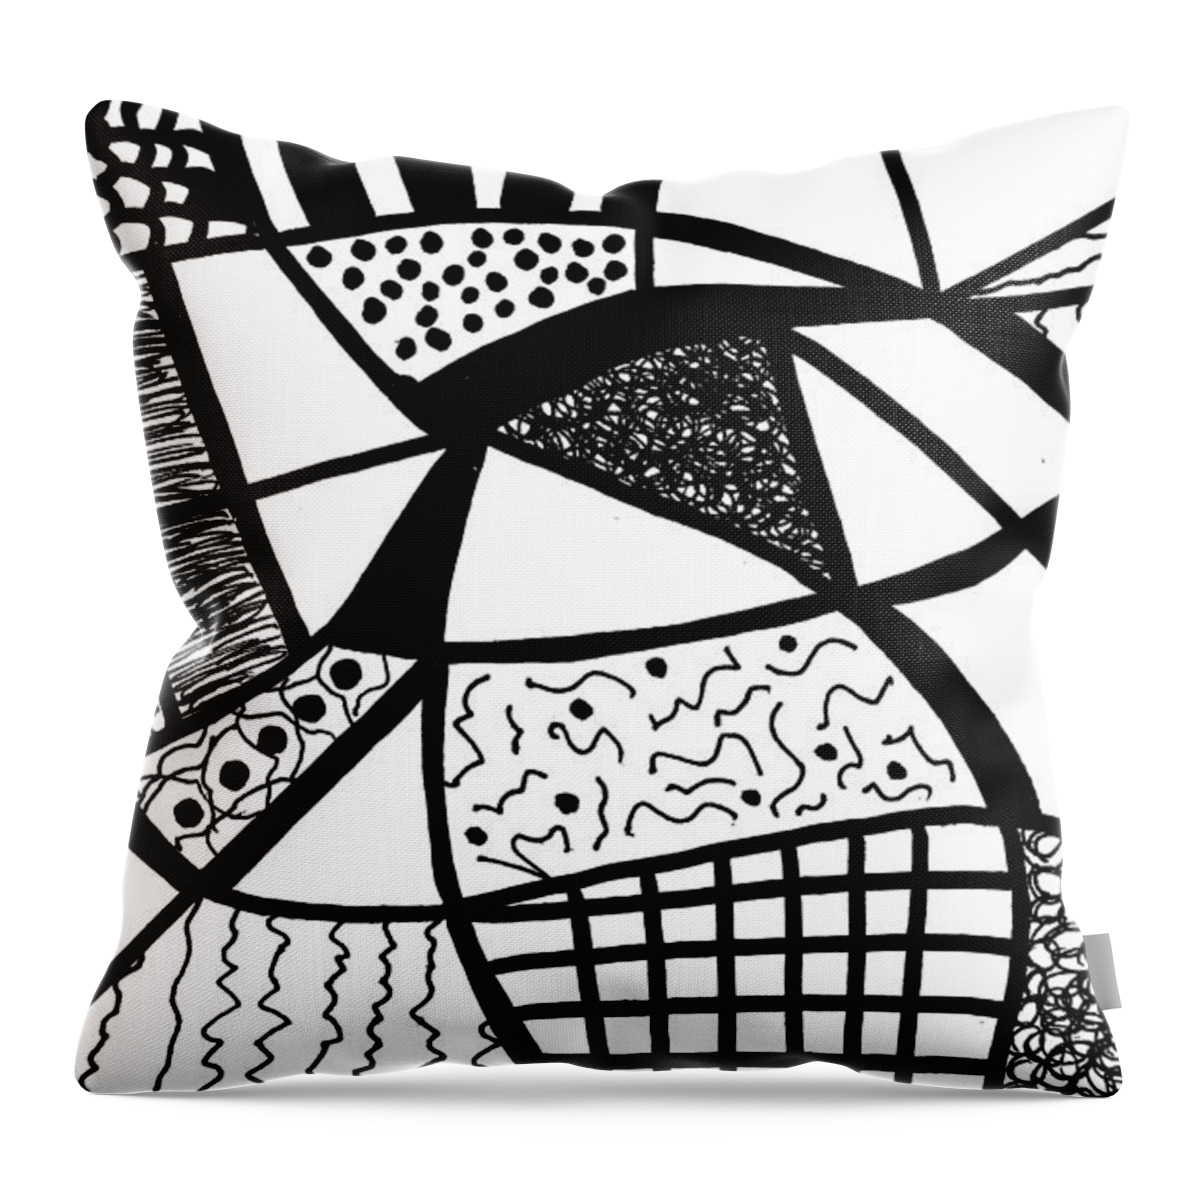 Original Drawing Throw Pillow featuring the drawing Darkness And Light 11 by Susan Schanerman